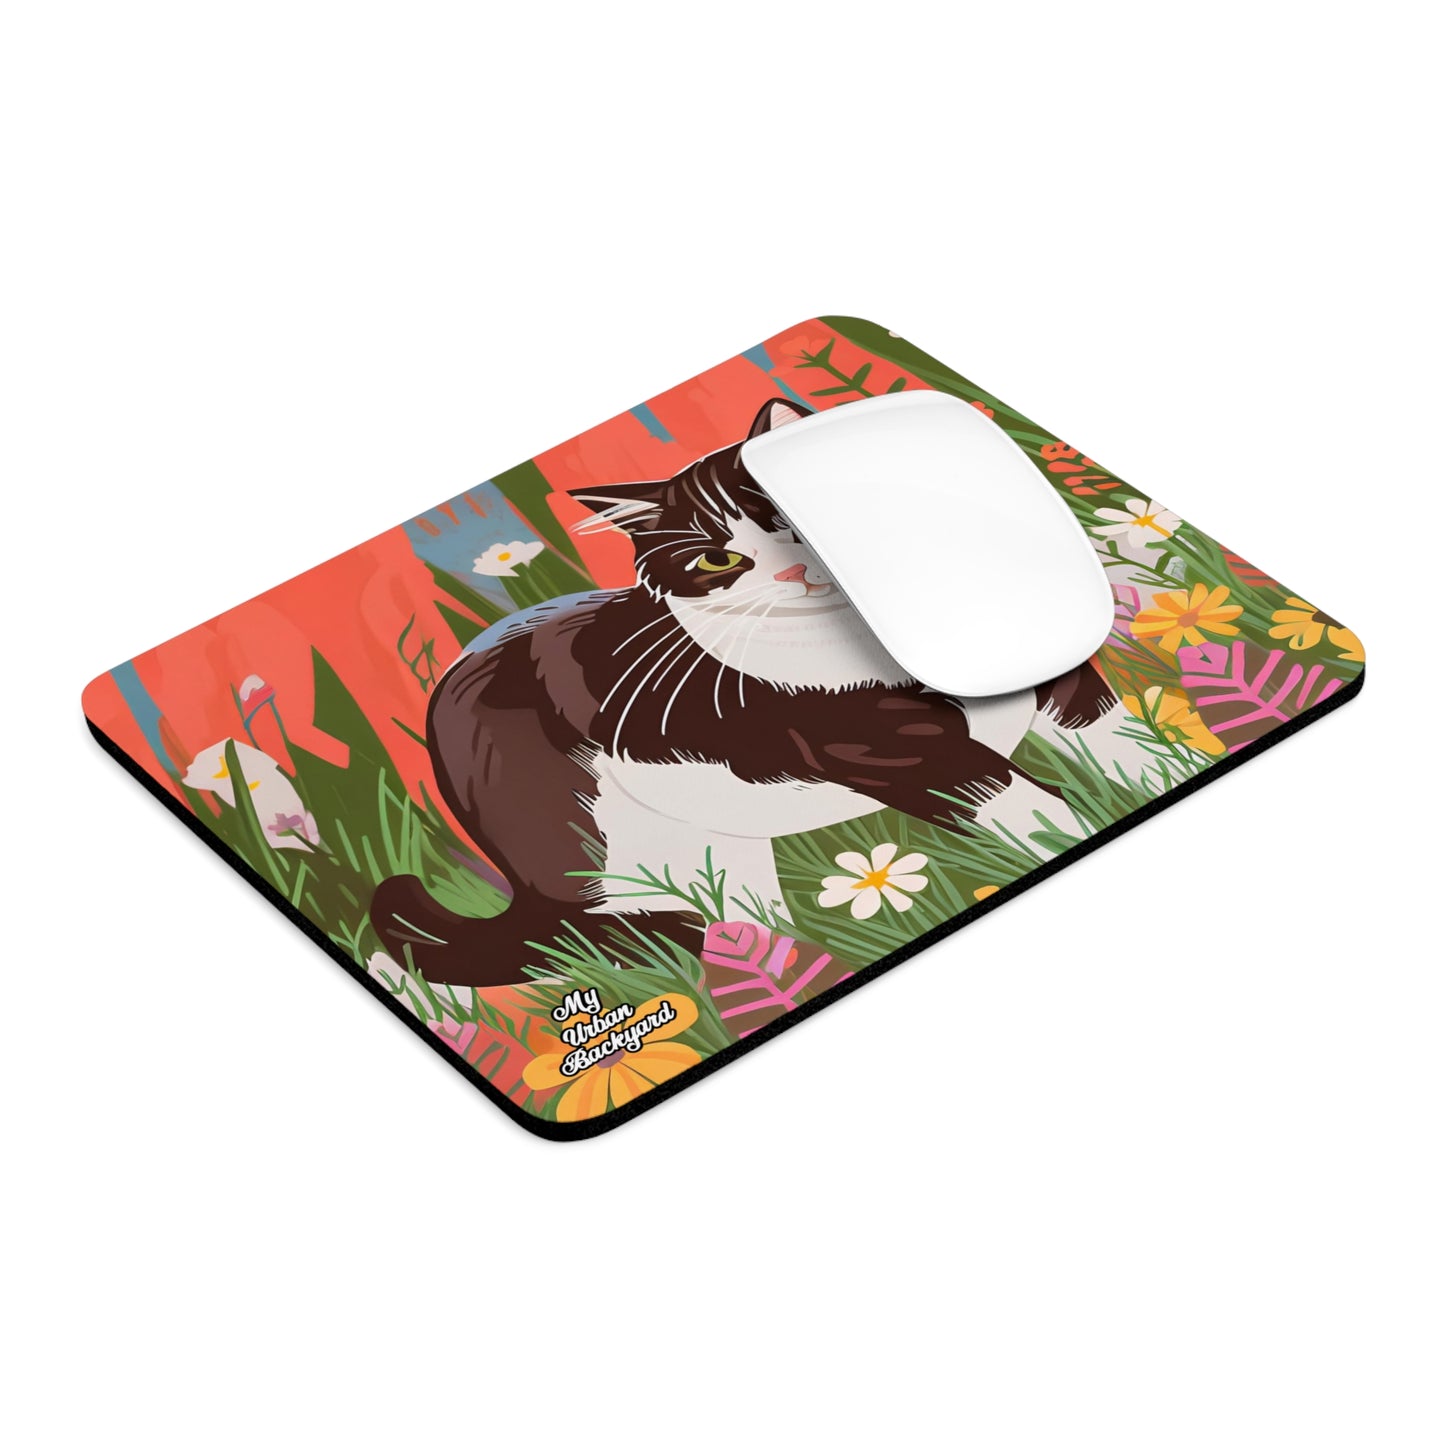 Cat with Wildflowers, Computer Mouse Pad - for Home or Office